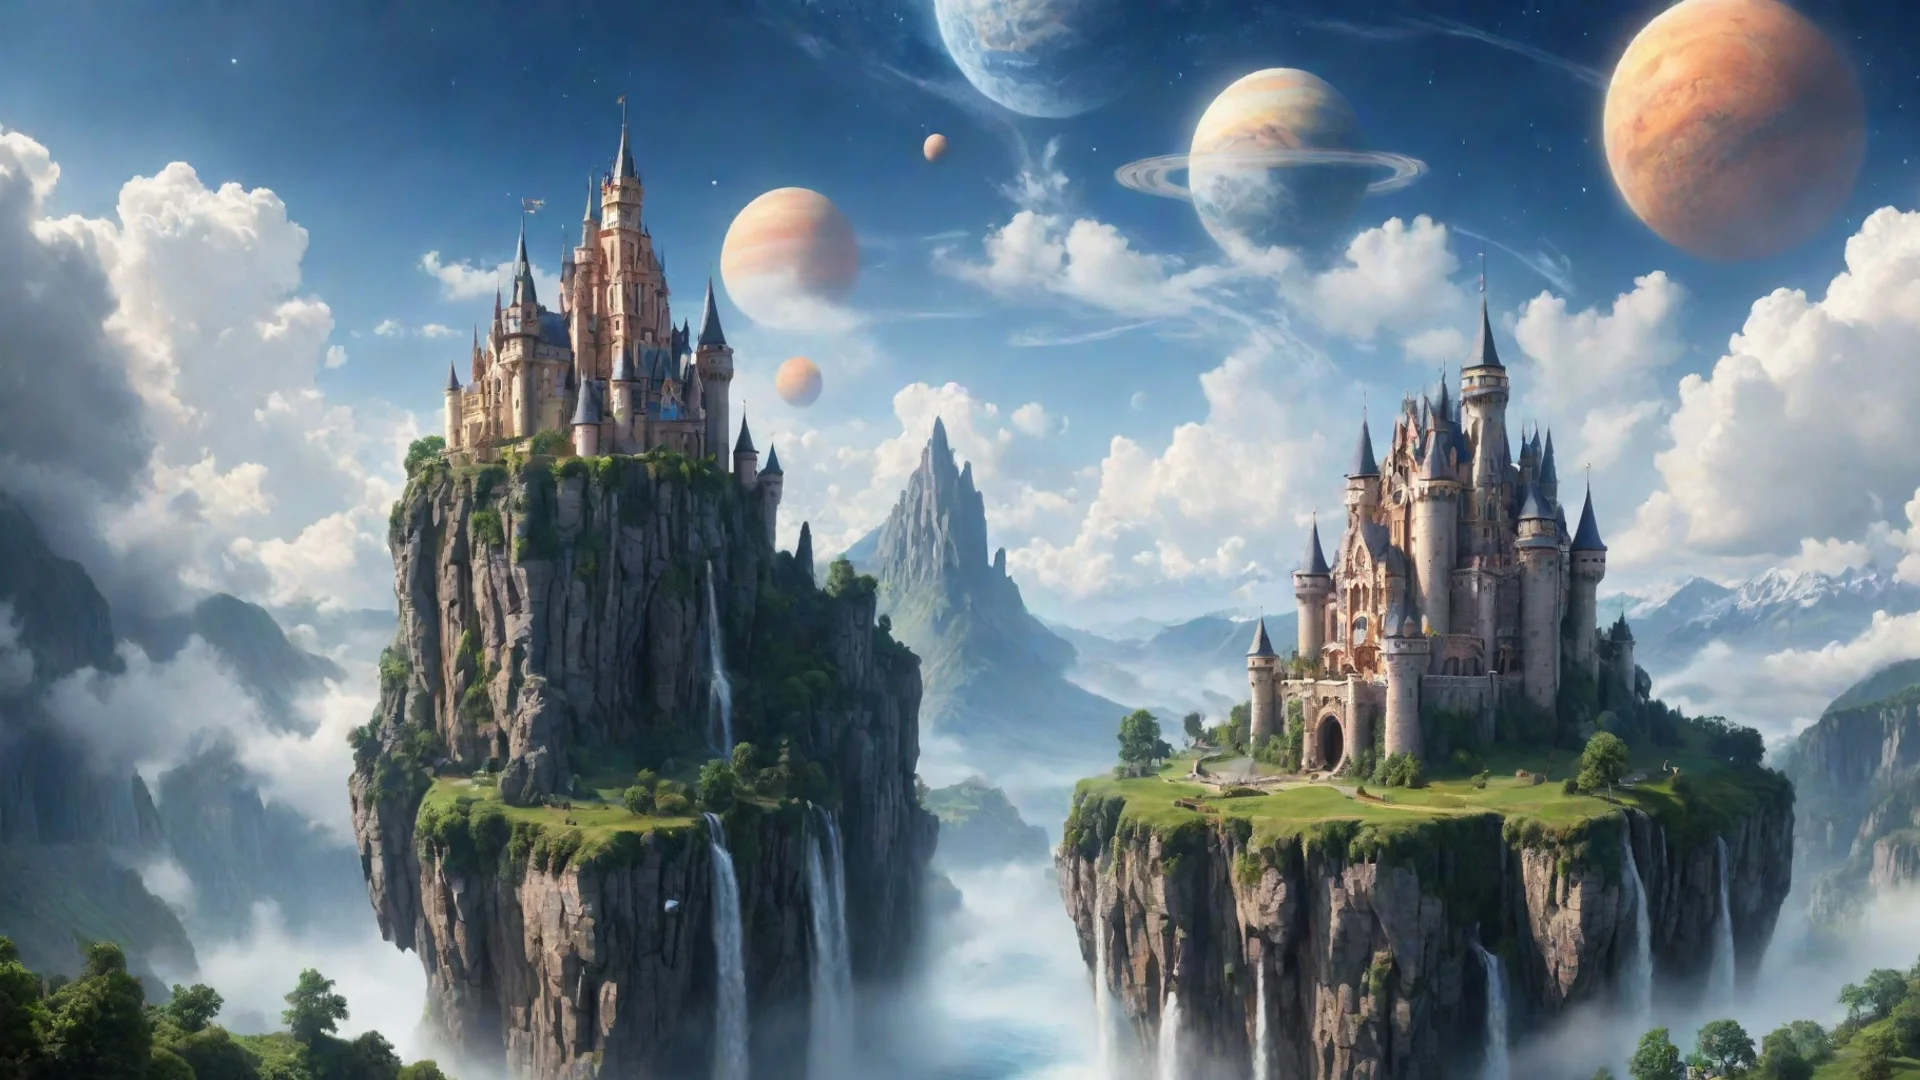 amazing logo saying stable diffusion   peaceful castle in sky epic floating castle on floating cliffs with waterfalls down beautiful sky with saturn planets awesome portrait 2 wide